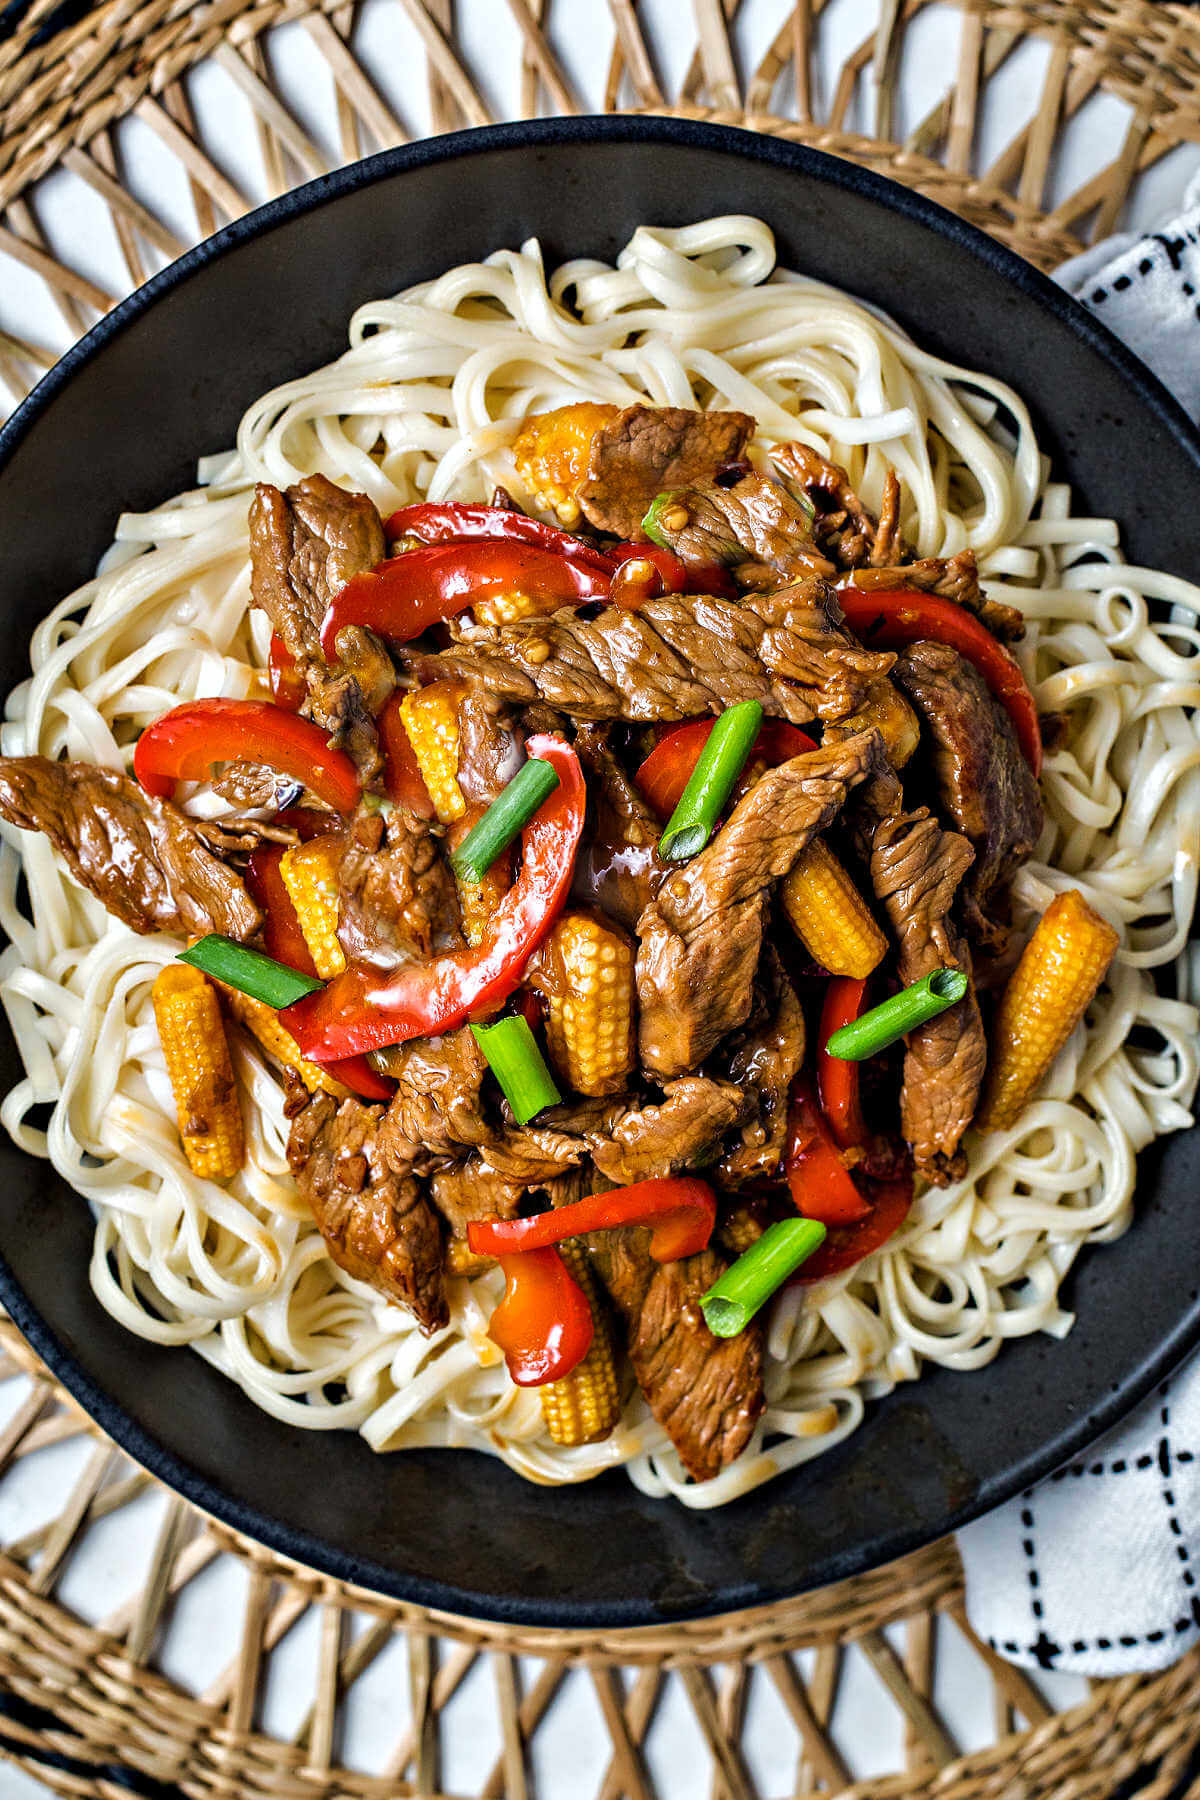 Korean Beef Stir Fry served over lo mein noodles in a bowl sitting on a rattan placement.